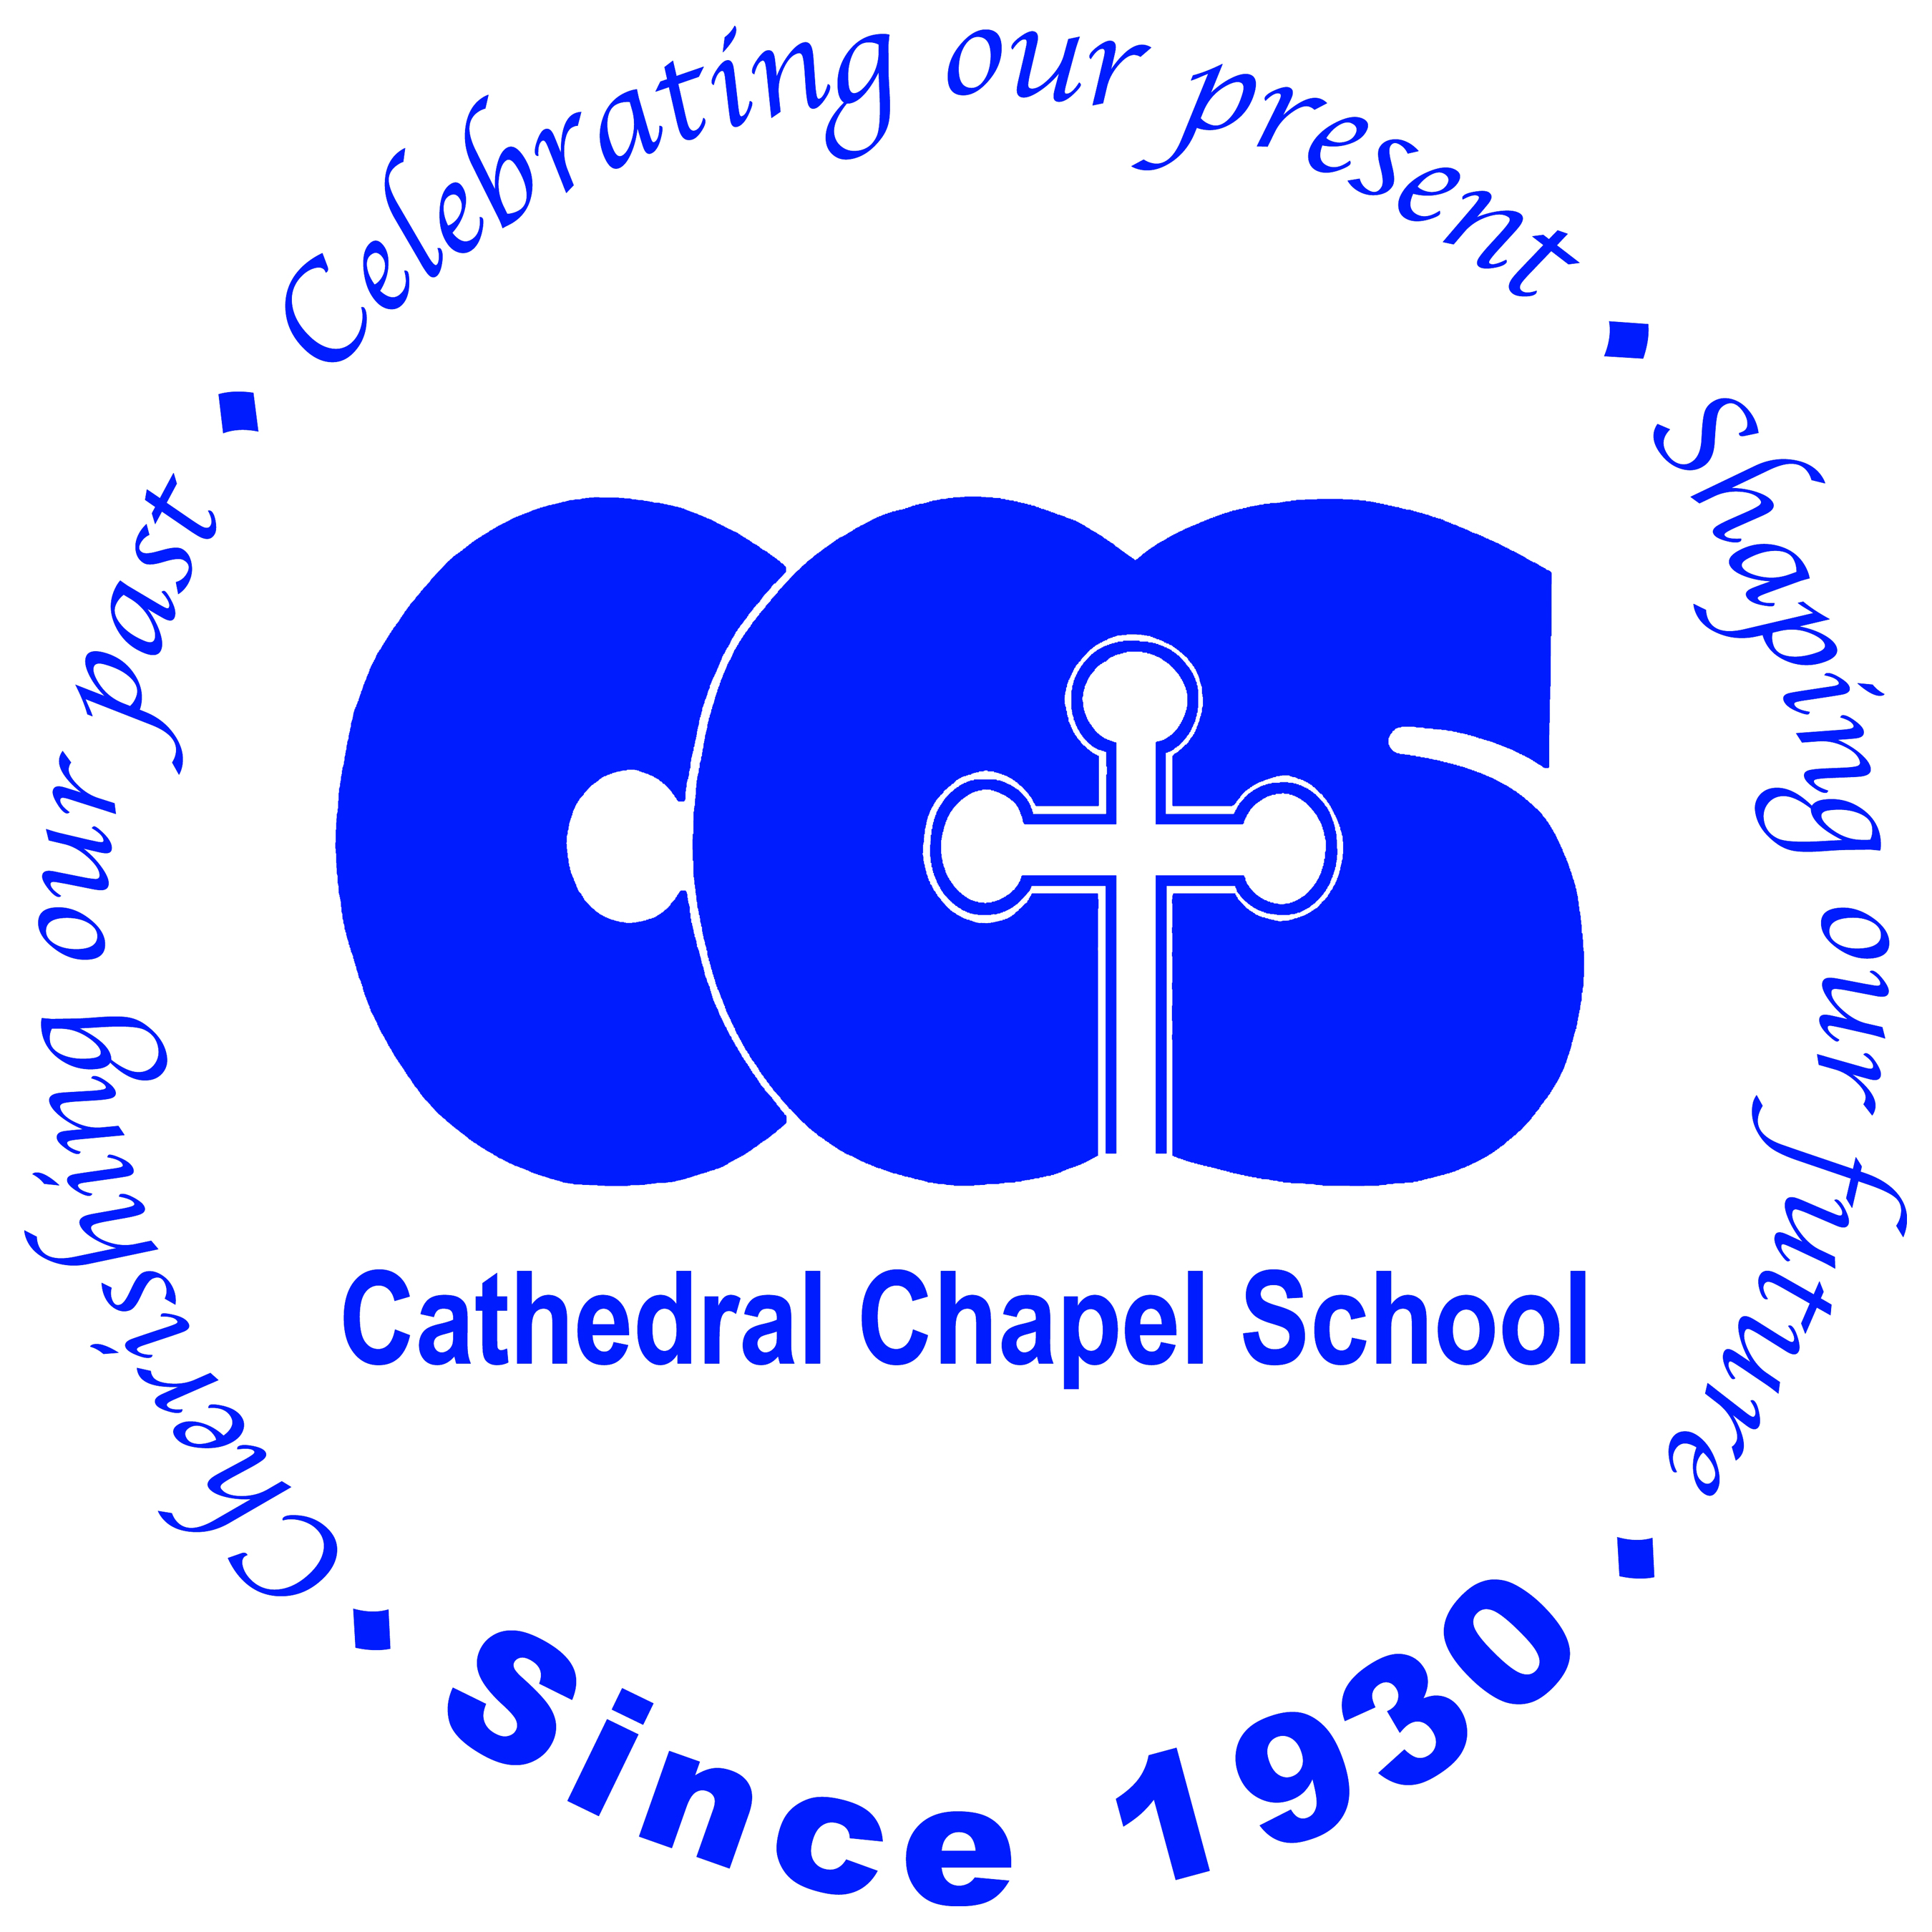 Cathedral Chapel School